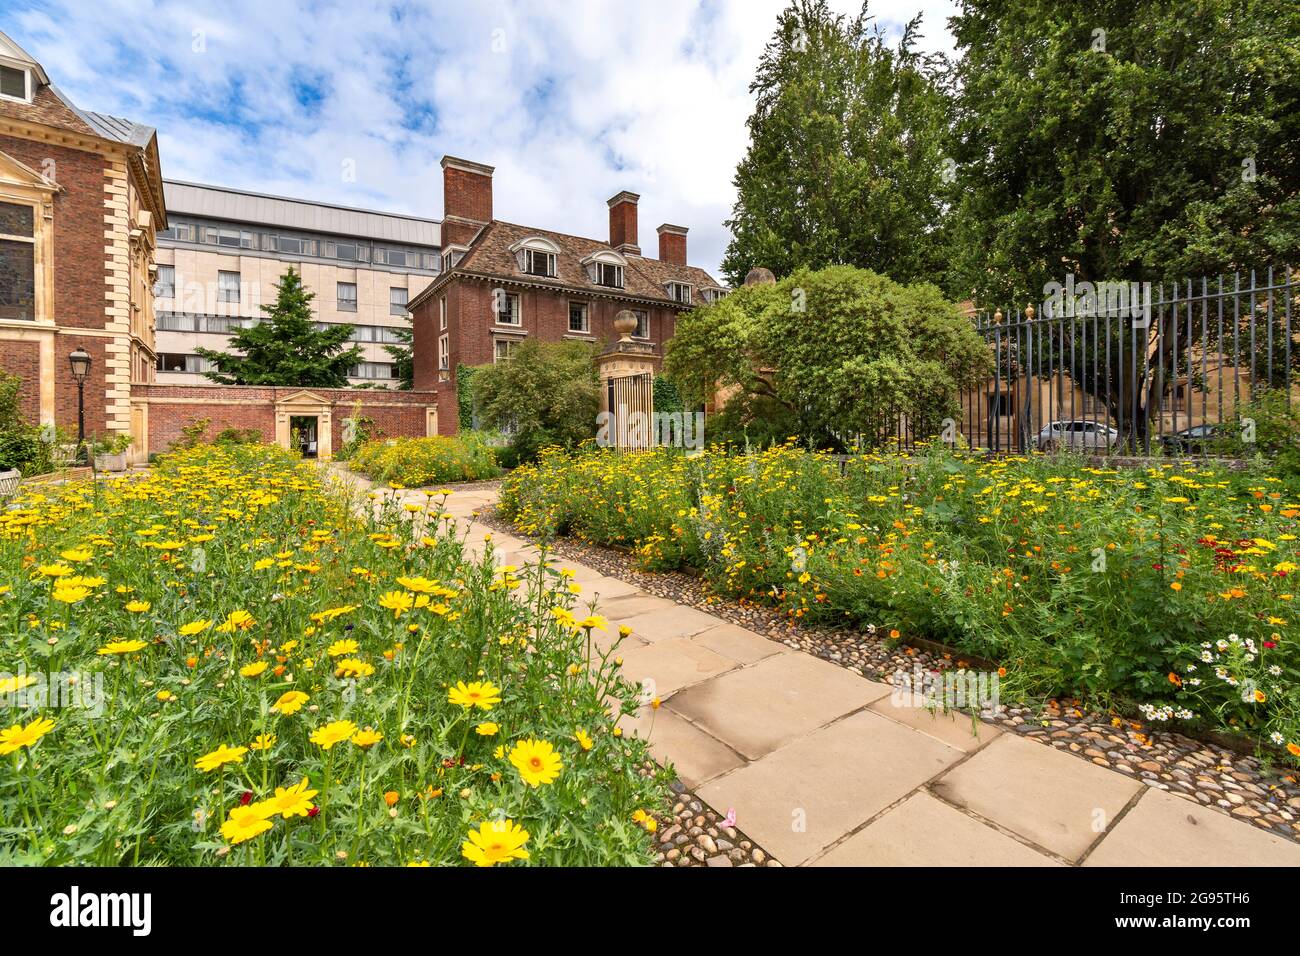 CAMBRIDGE ENGLAND TRUMPINGTON STREET ST CATHARINE'S COLLEGE VERY COLOURFUL FLOWER BEDS IN SUMMER Stock Photo